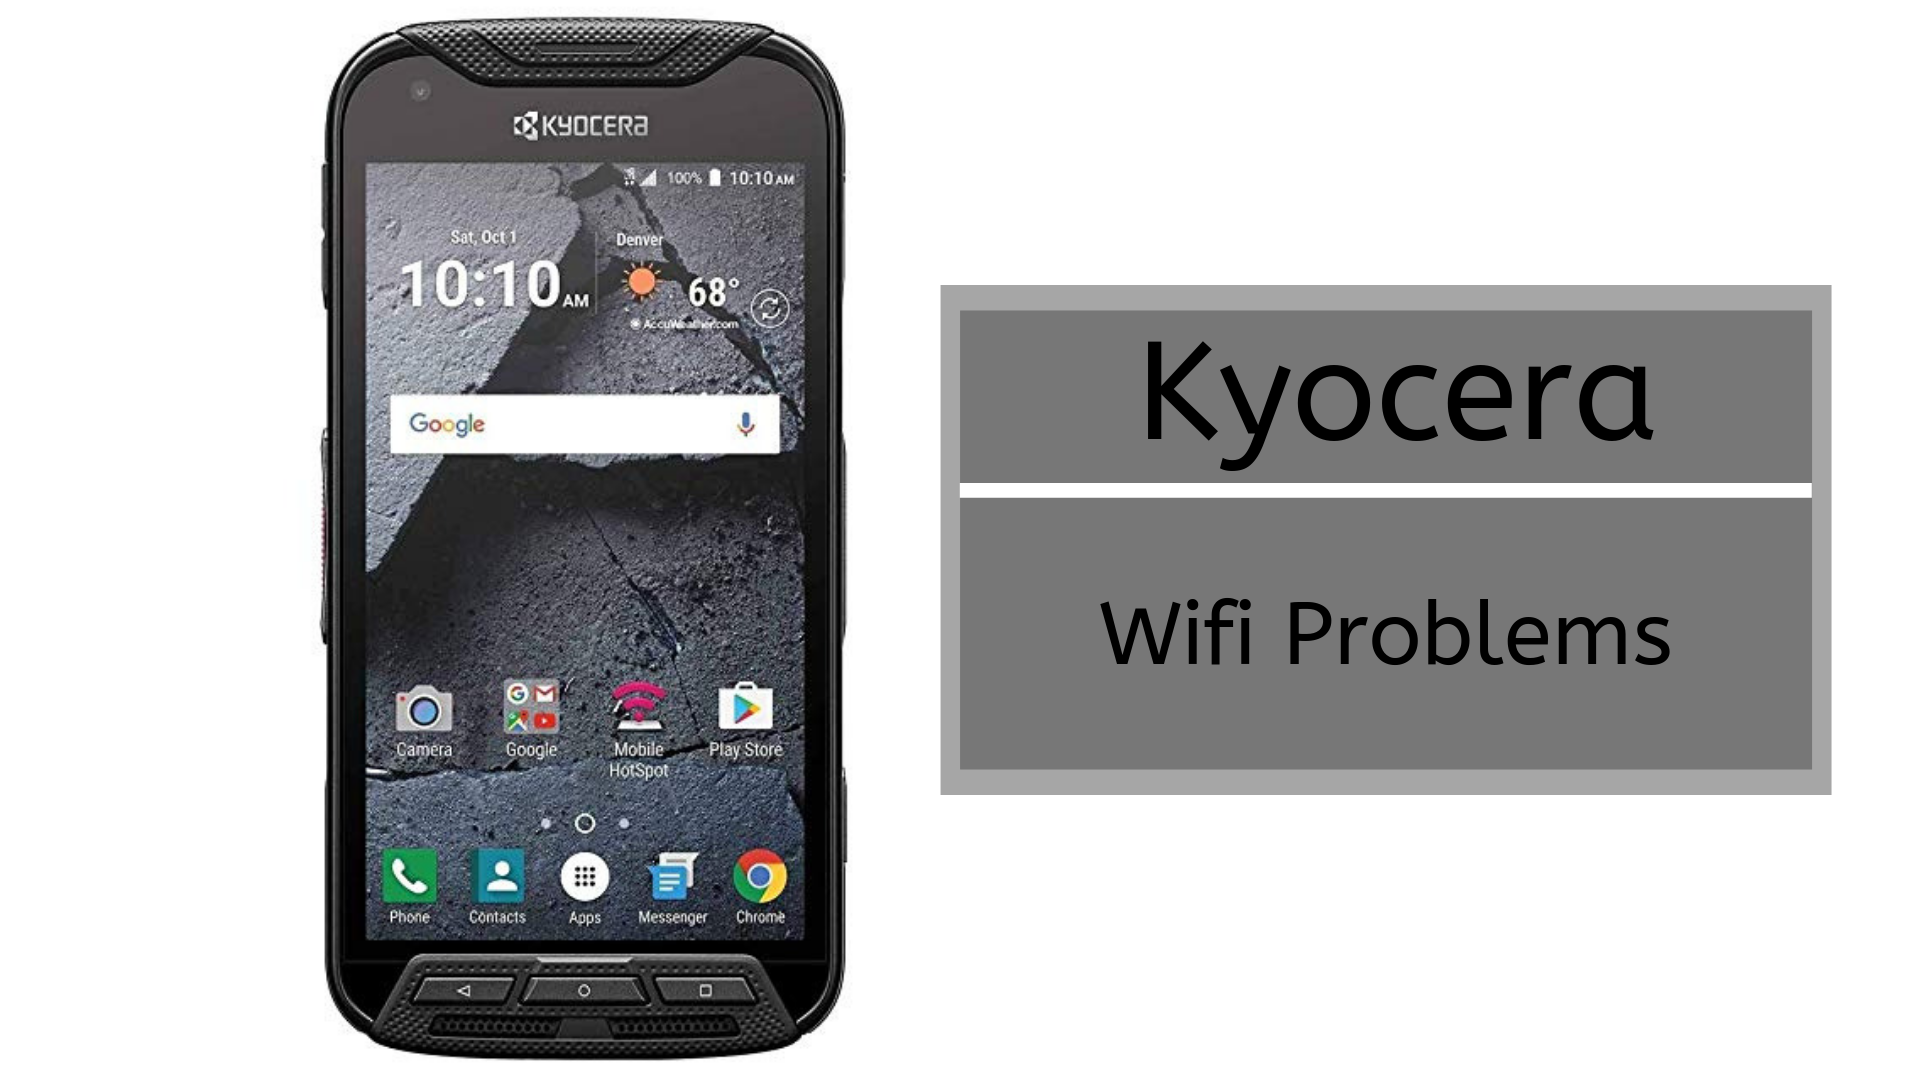 Quick Guide To Fix Kyocera Wifi Problems [Troubleshoot]